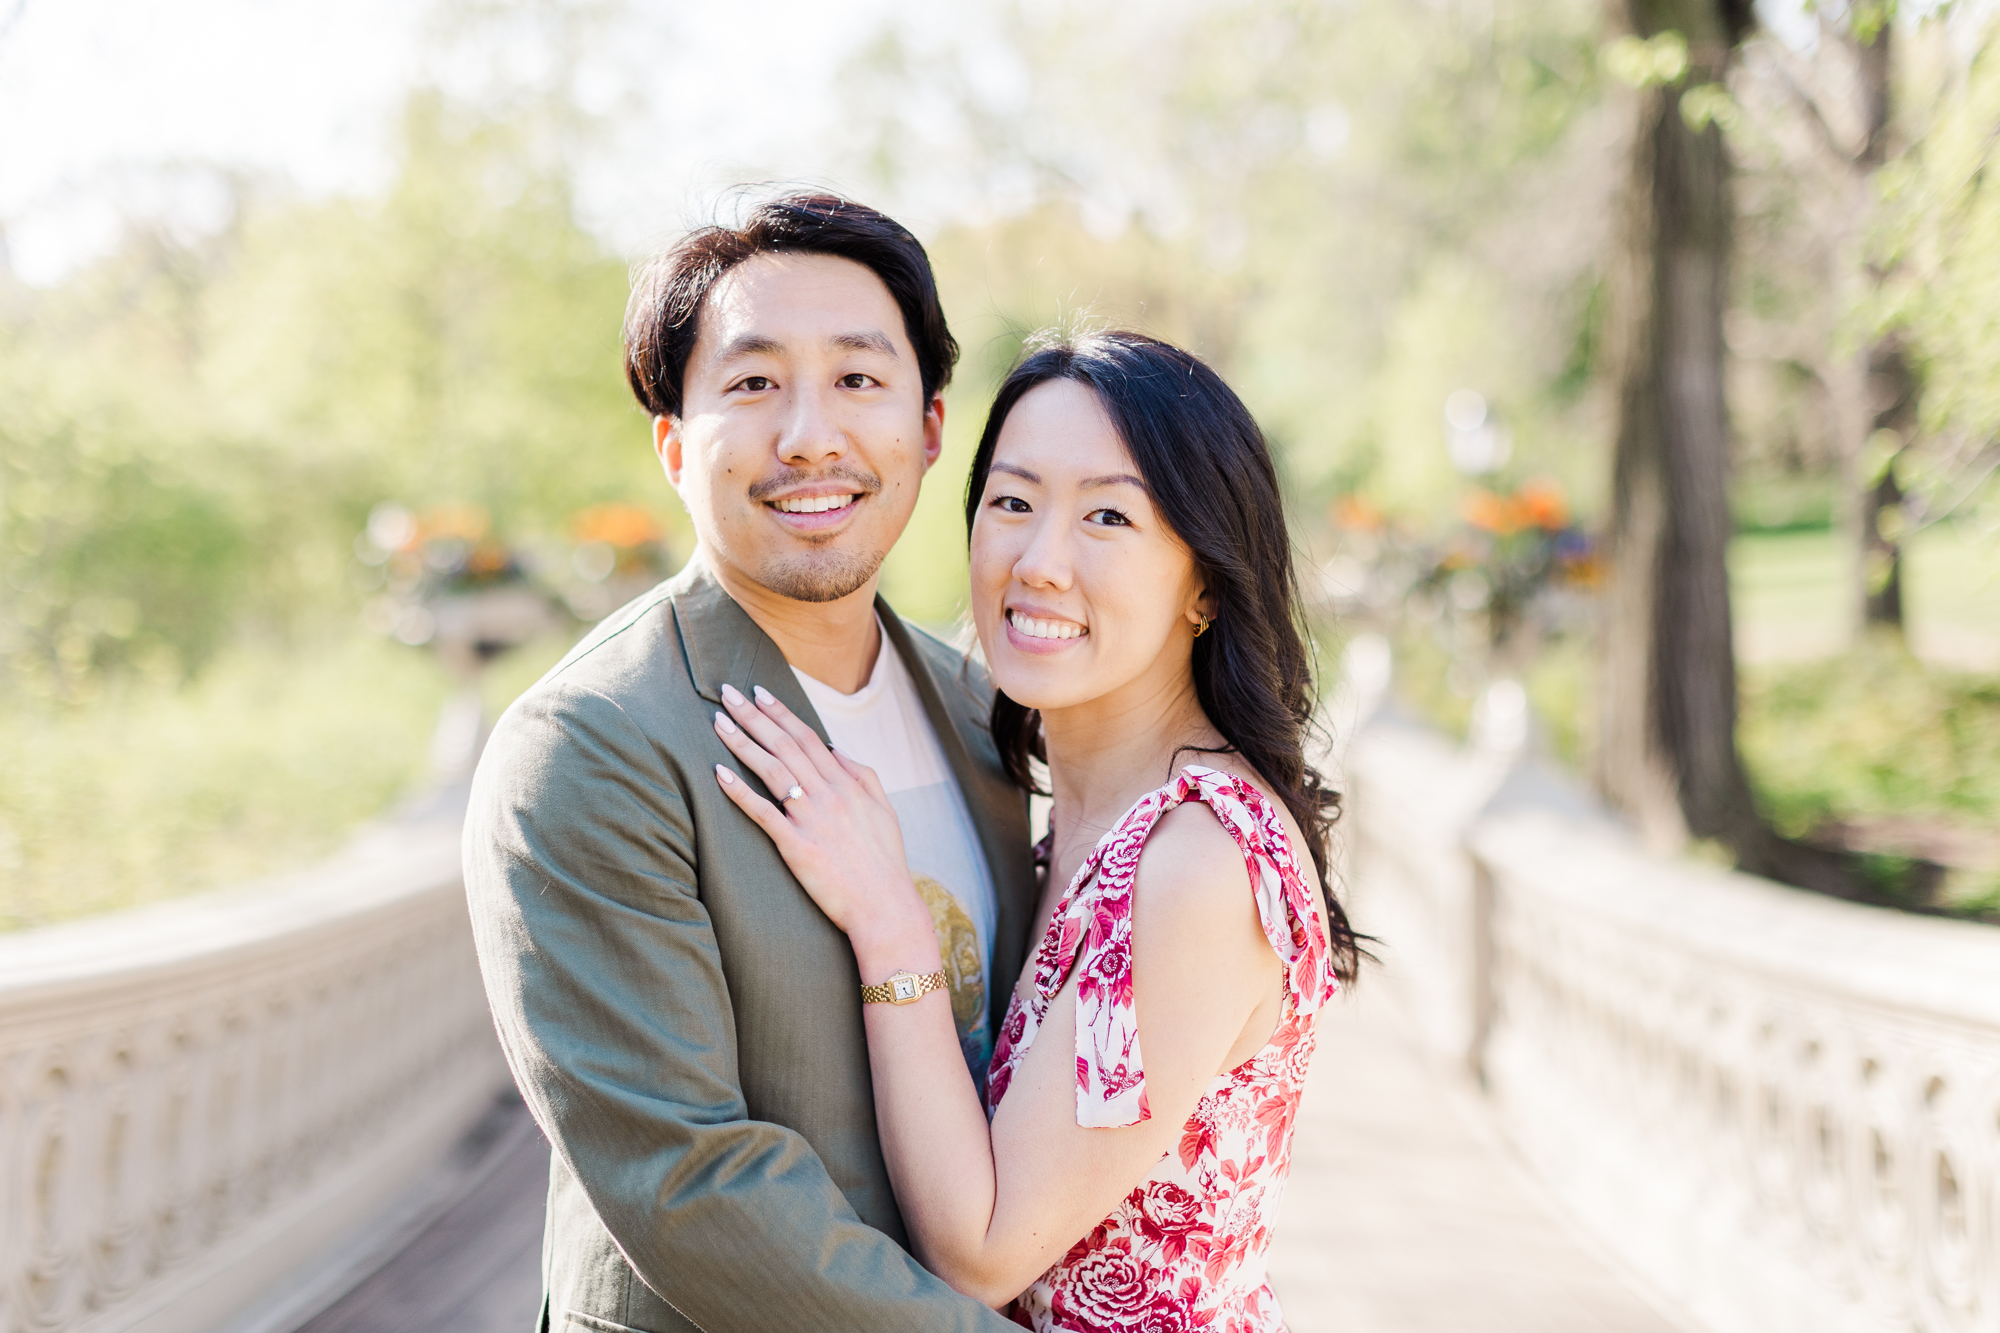 Romantic Engagement Photos With Cherry Blossoms in NYC